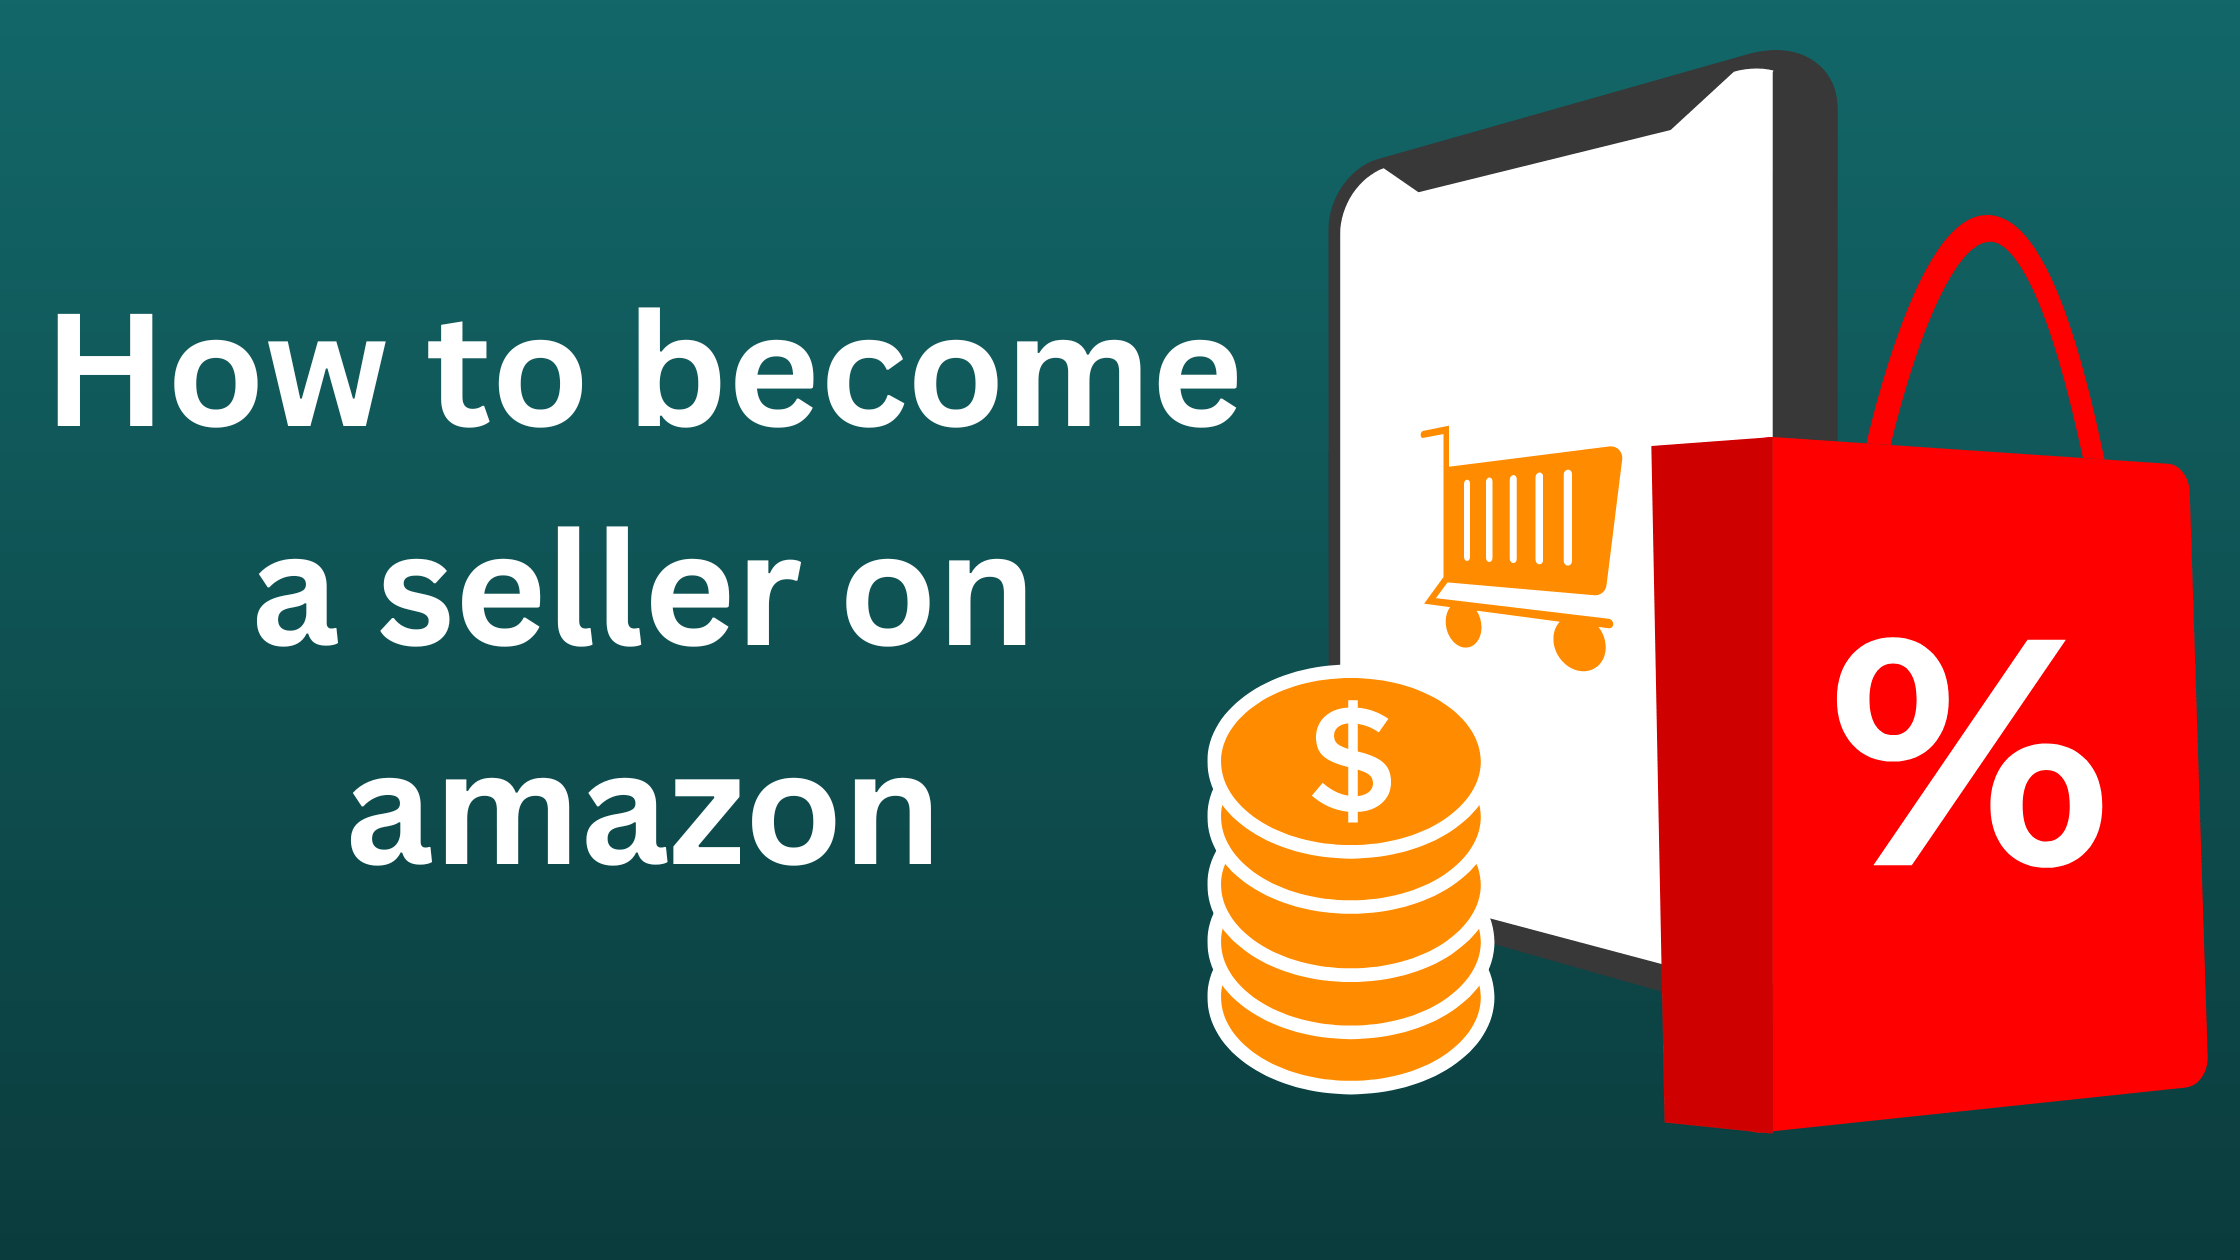 How to become a seller on amazon